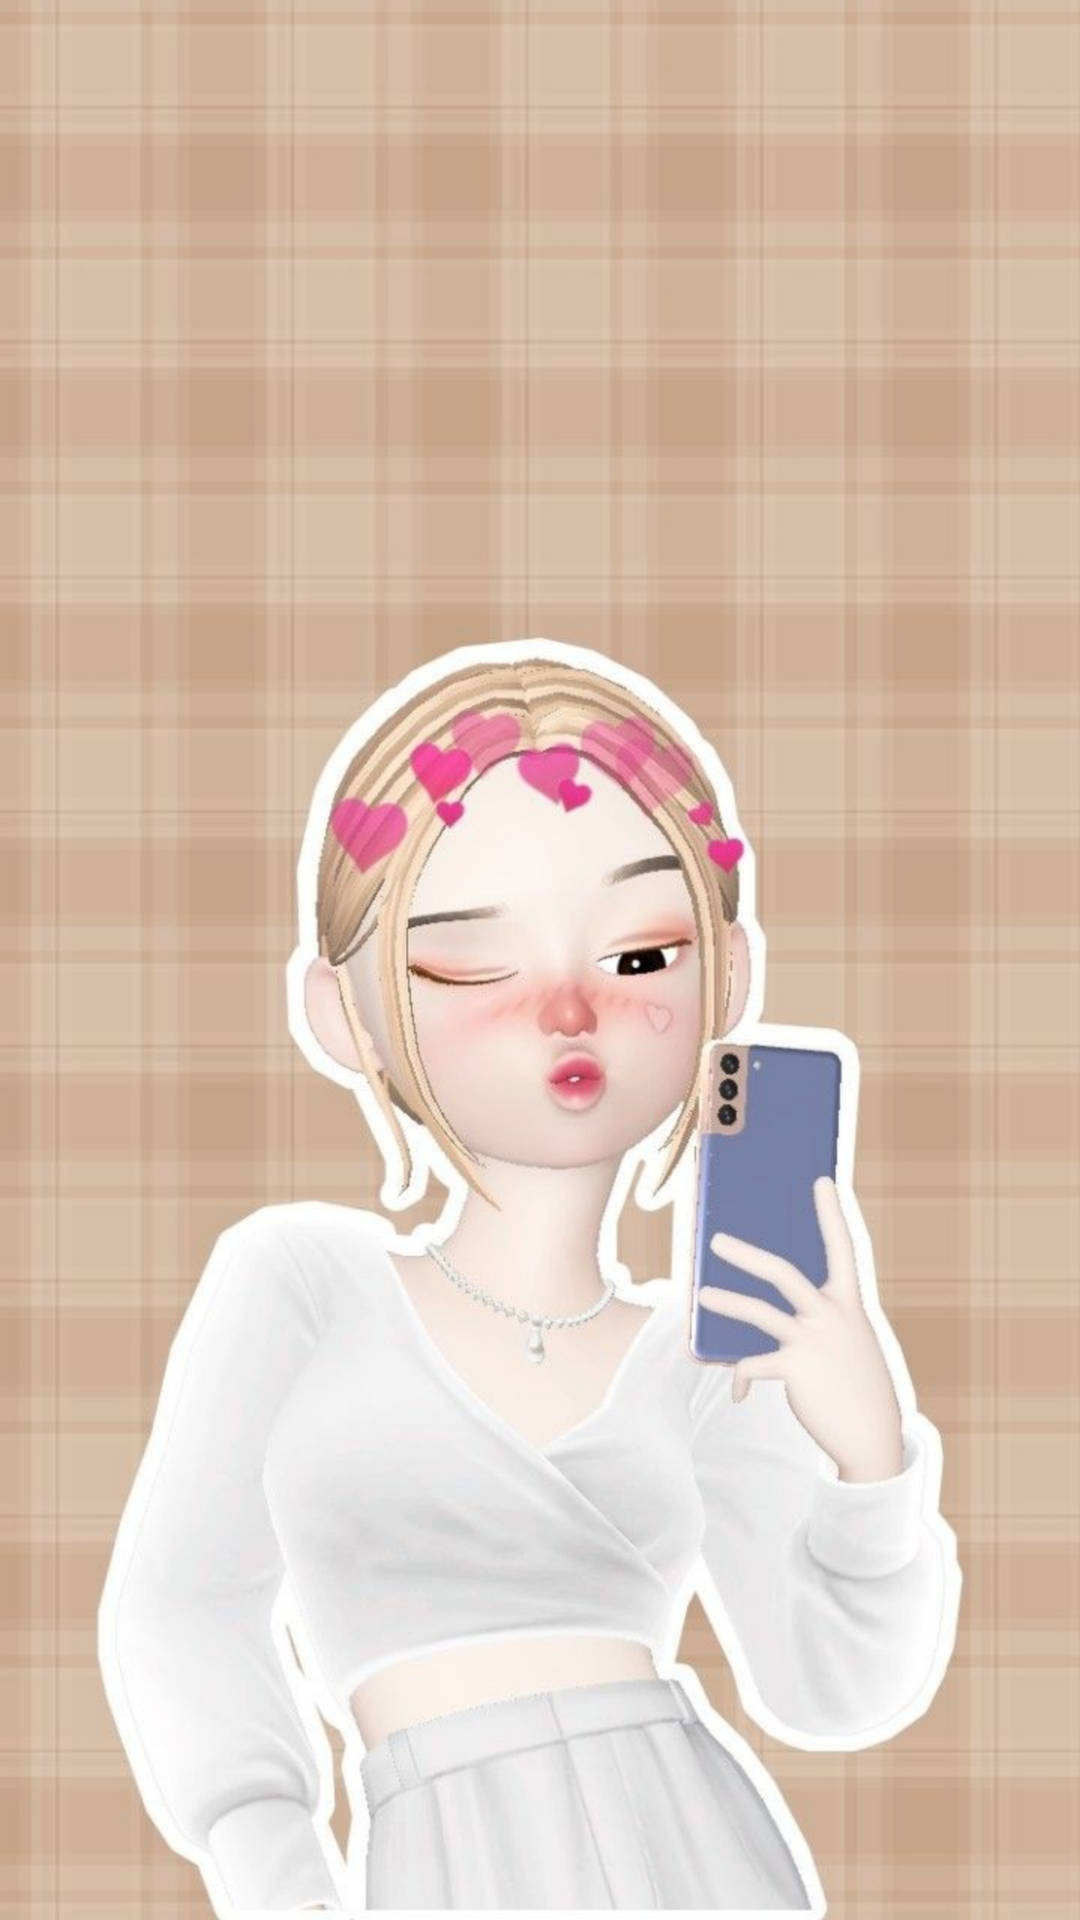 Zepeto Cute Girl With Pouty Lips Wallpaper